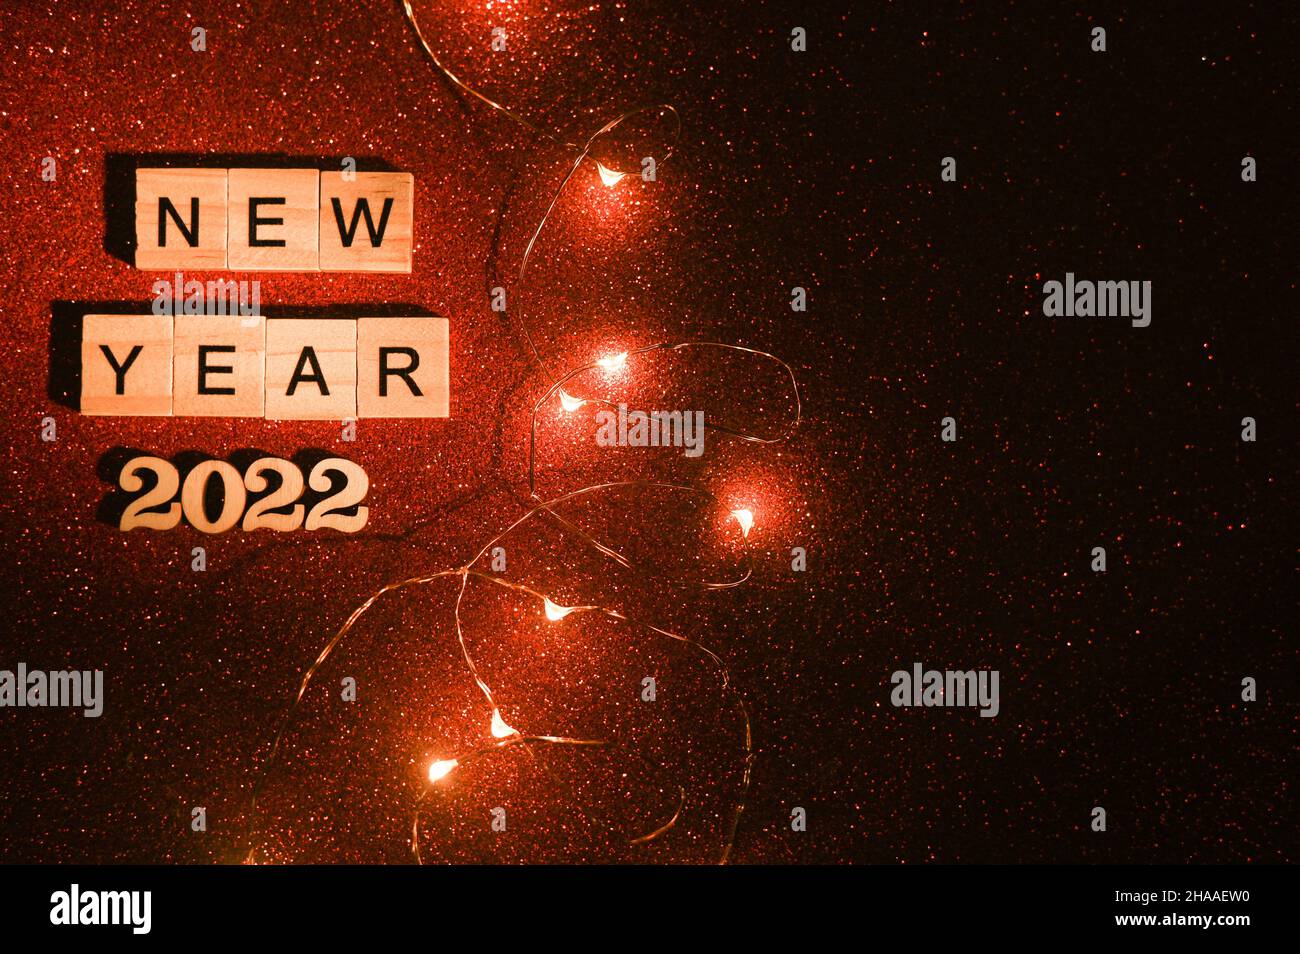 new year 2022. wooden letters on blocks. on a red background Stock Photo